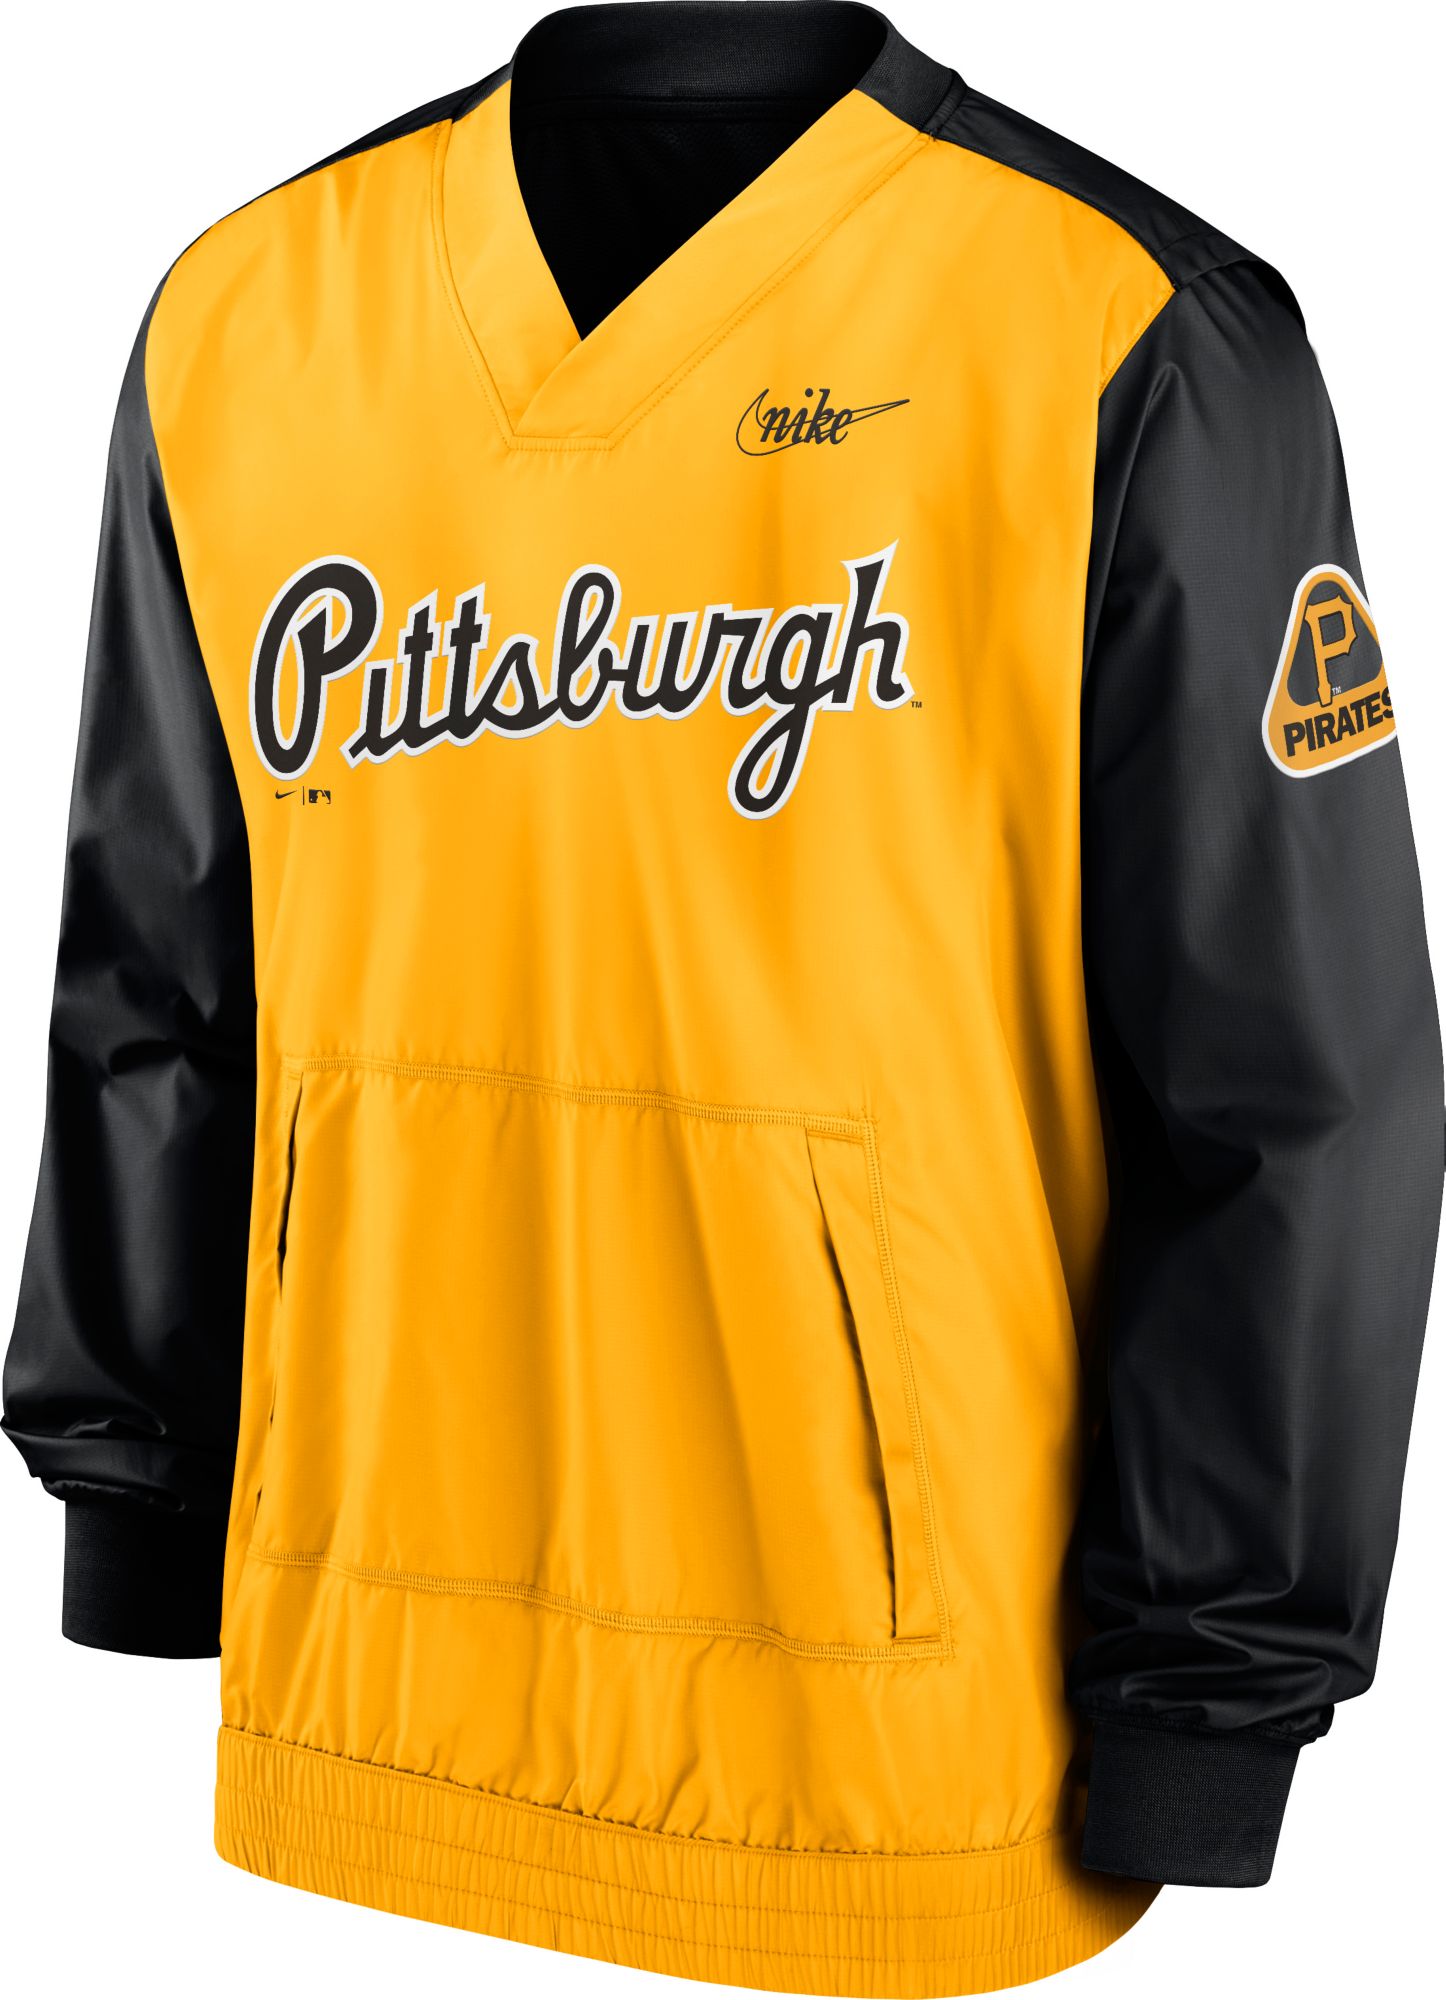 Nike Men's Gray Pittsburgh Pirates Road Authentic Team Jersey